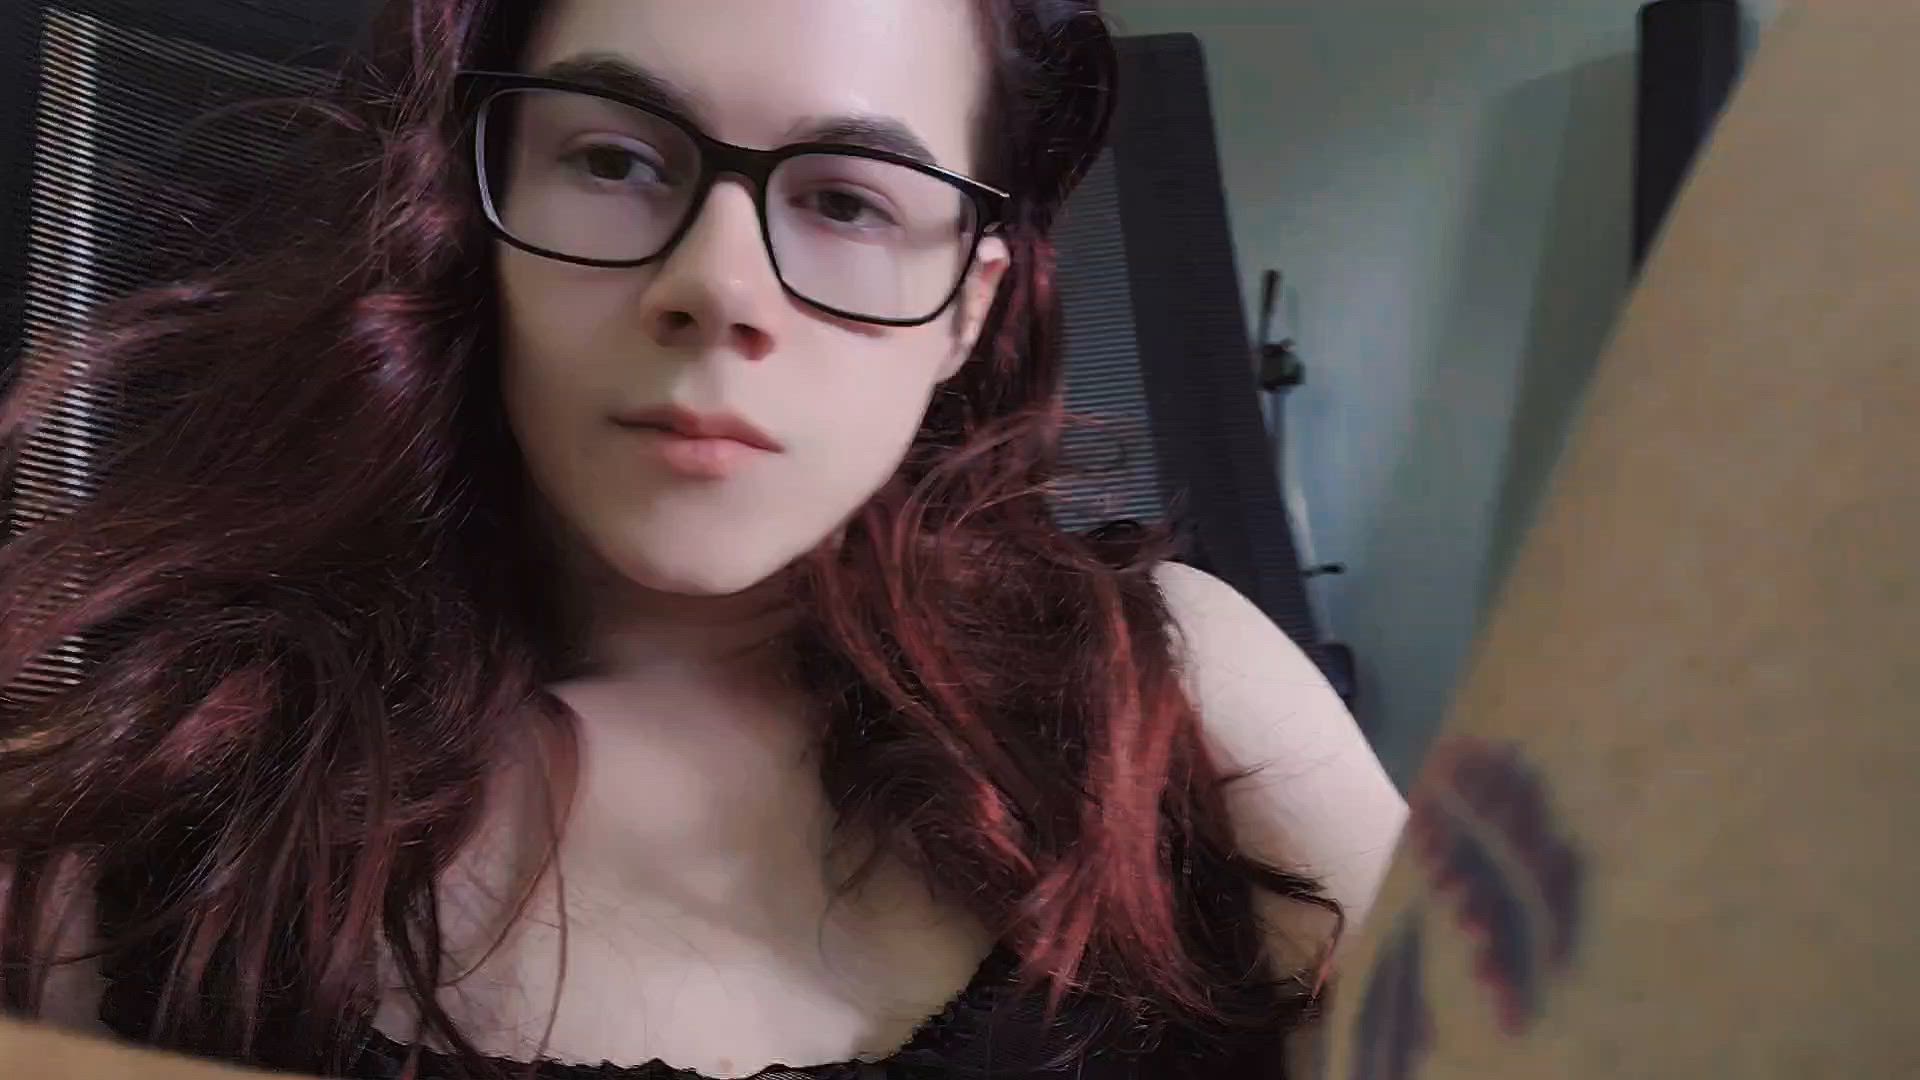 Amateur porn video with onlyfans model Littlemapleberry <strong>@littlemapleberry</strong>